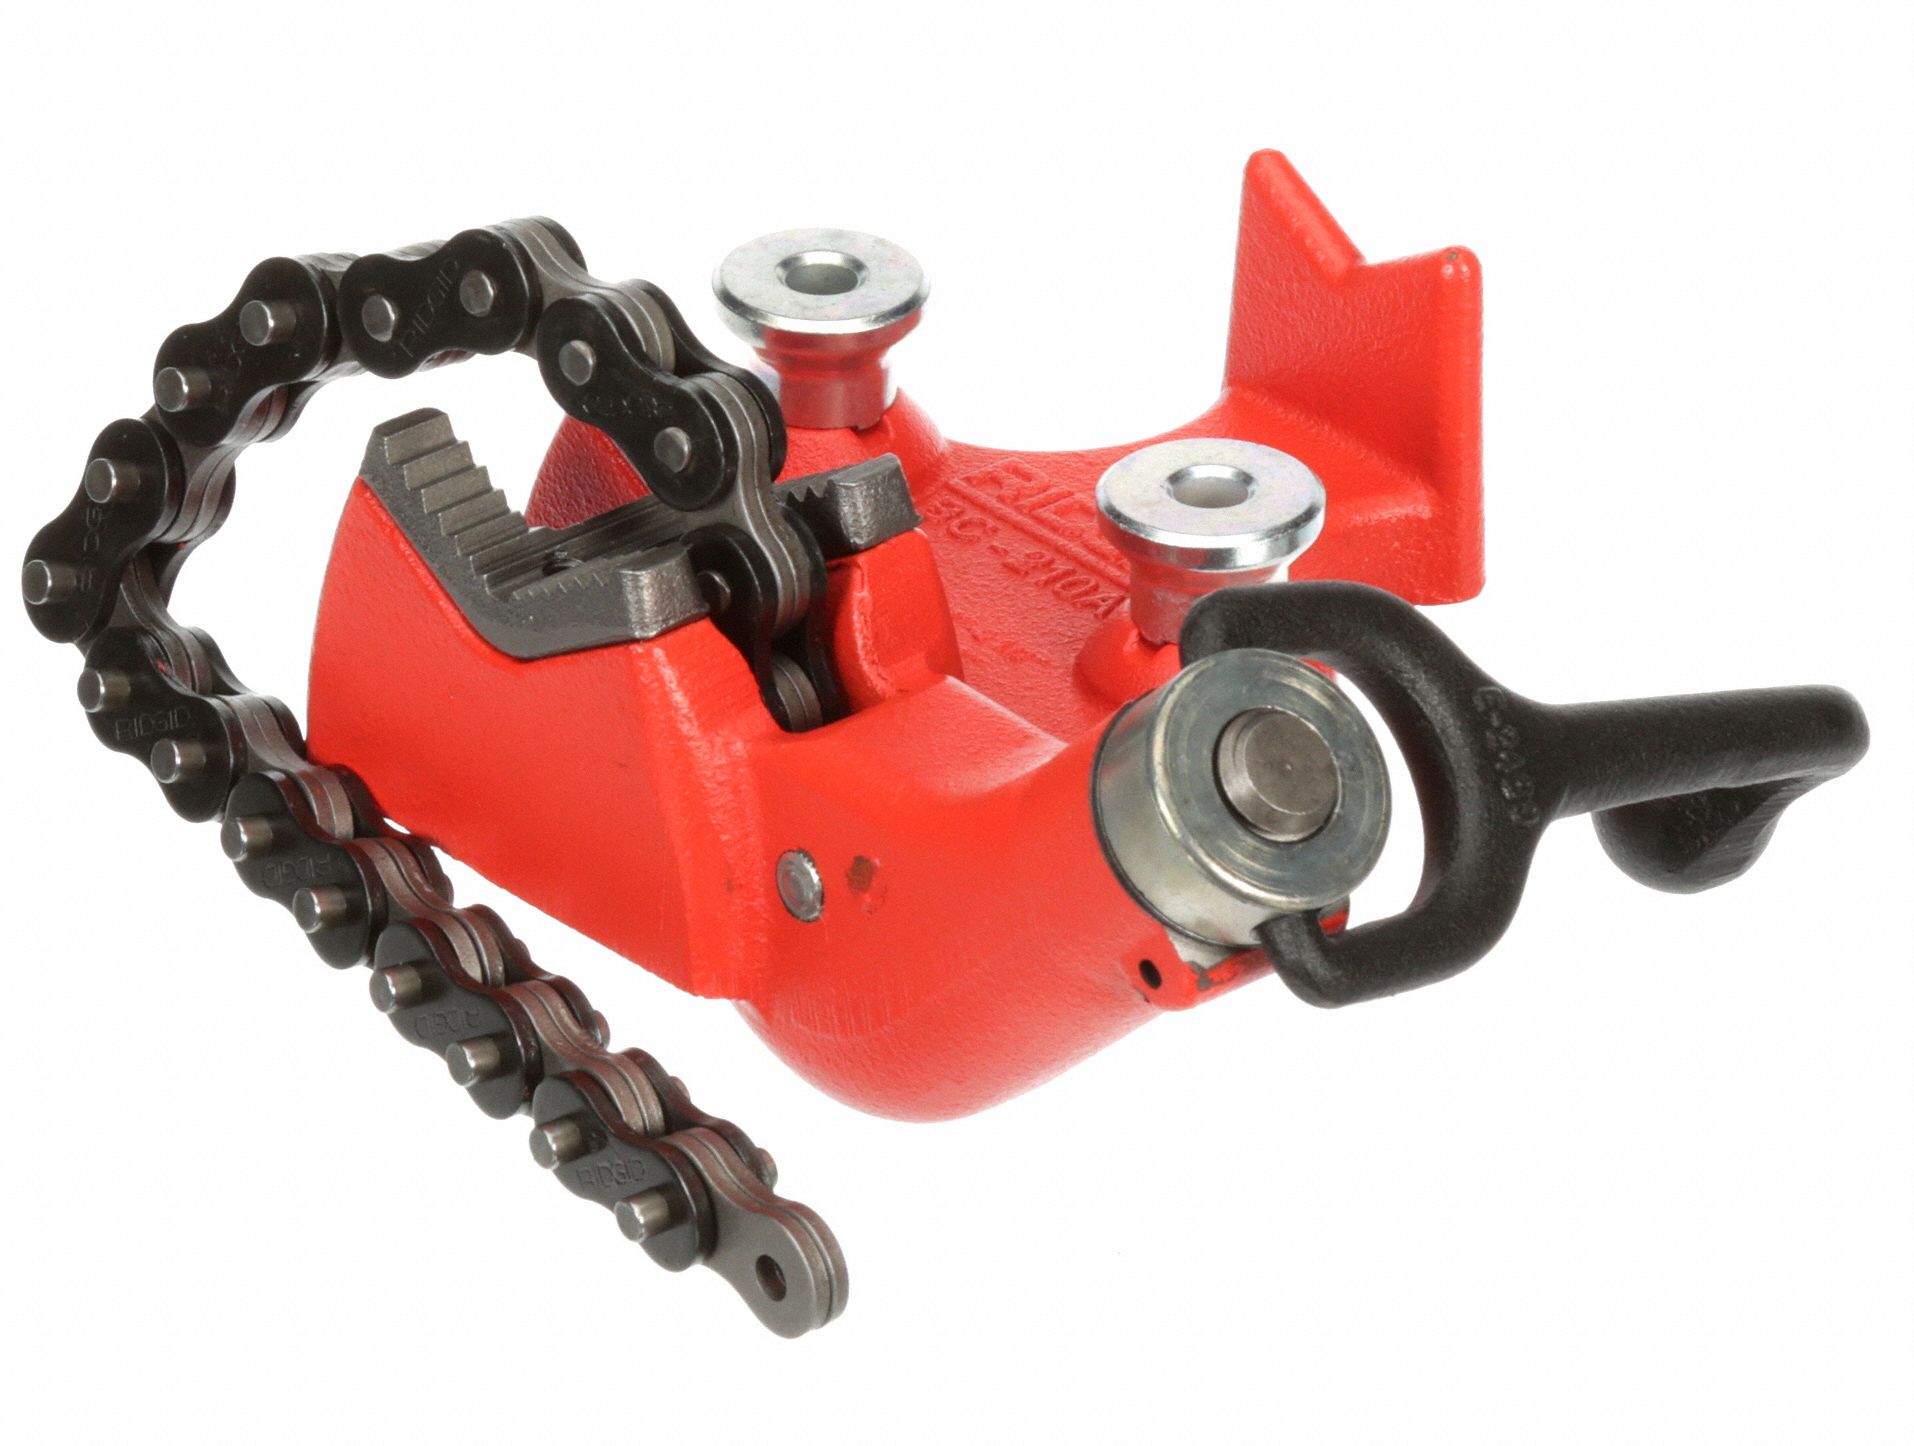 RIDGID Bench Chain Vise, 1/8 to 2-1/2 in Pipe Capacity, 3-1/2 in ...